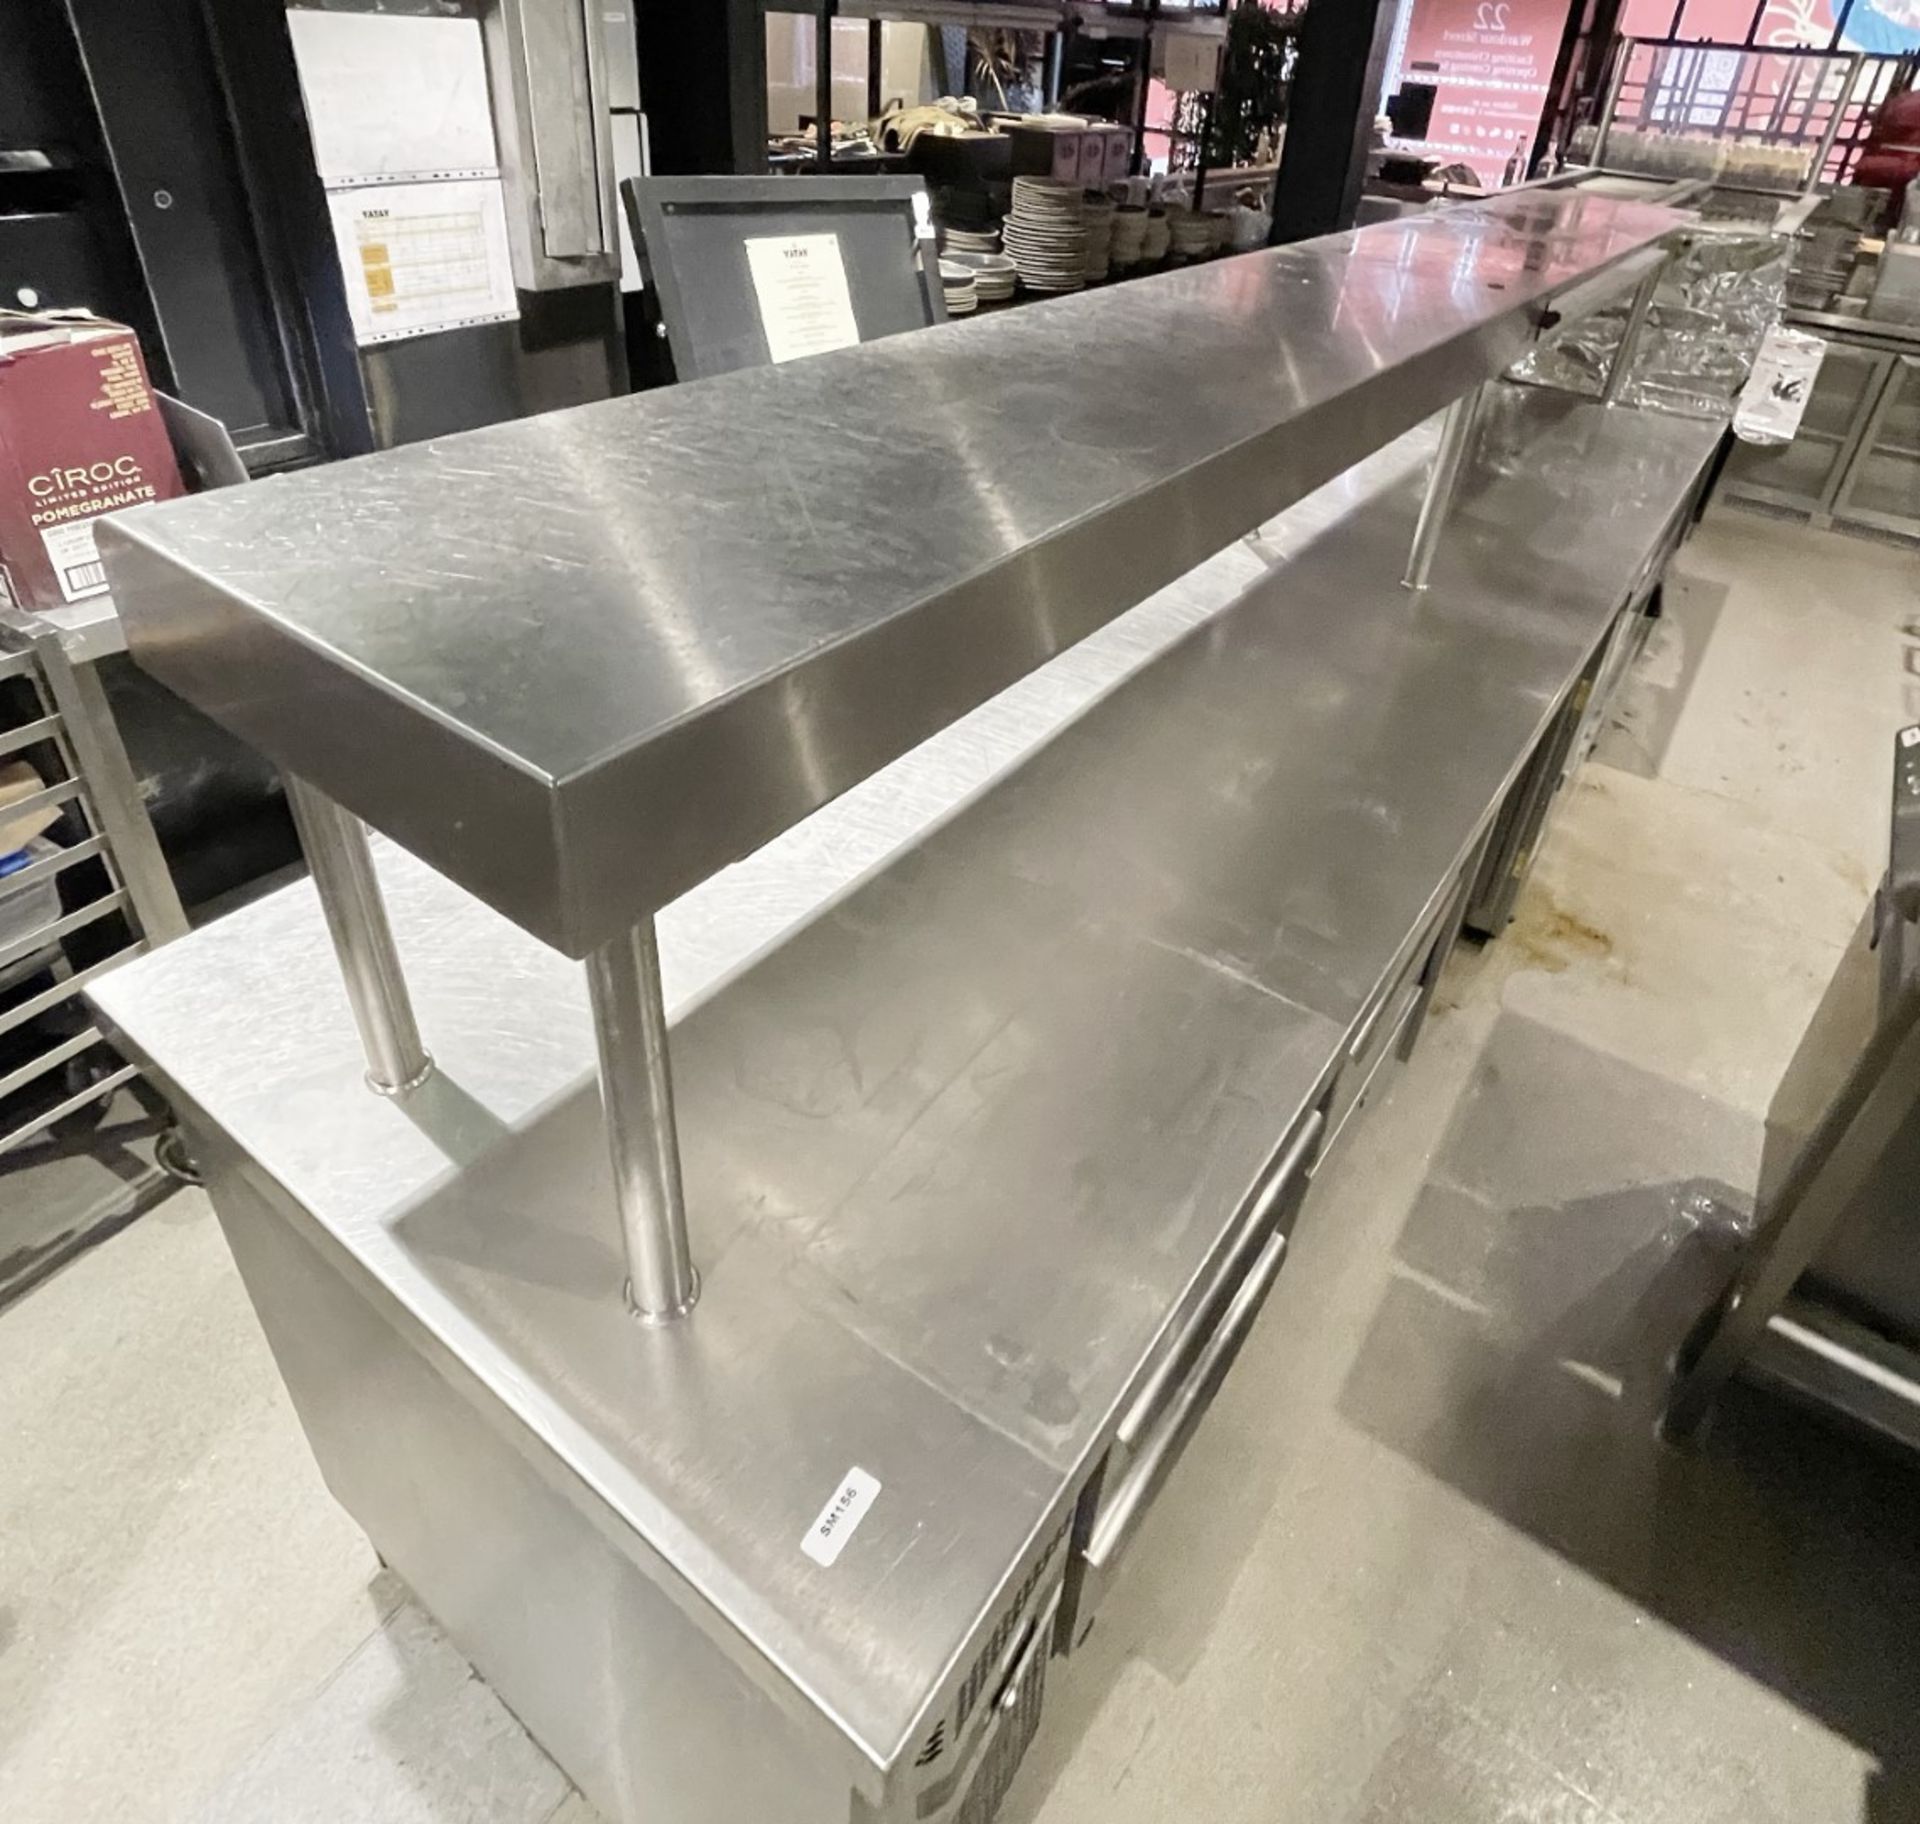 1 x Bespoke 15ft Commercial Kitchen Preparation Island with a Stainless Steel Construction - Image 2 of 15